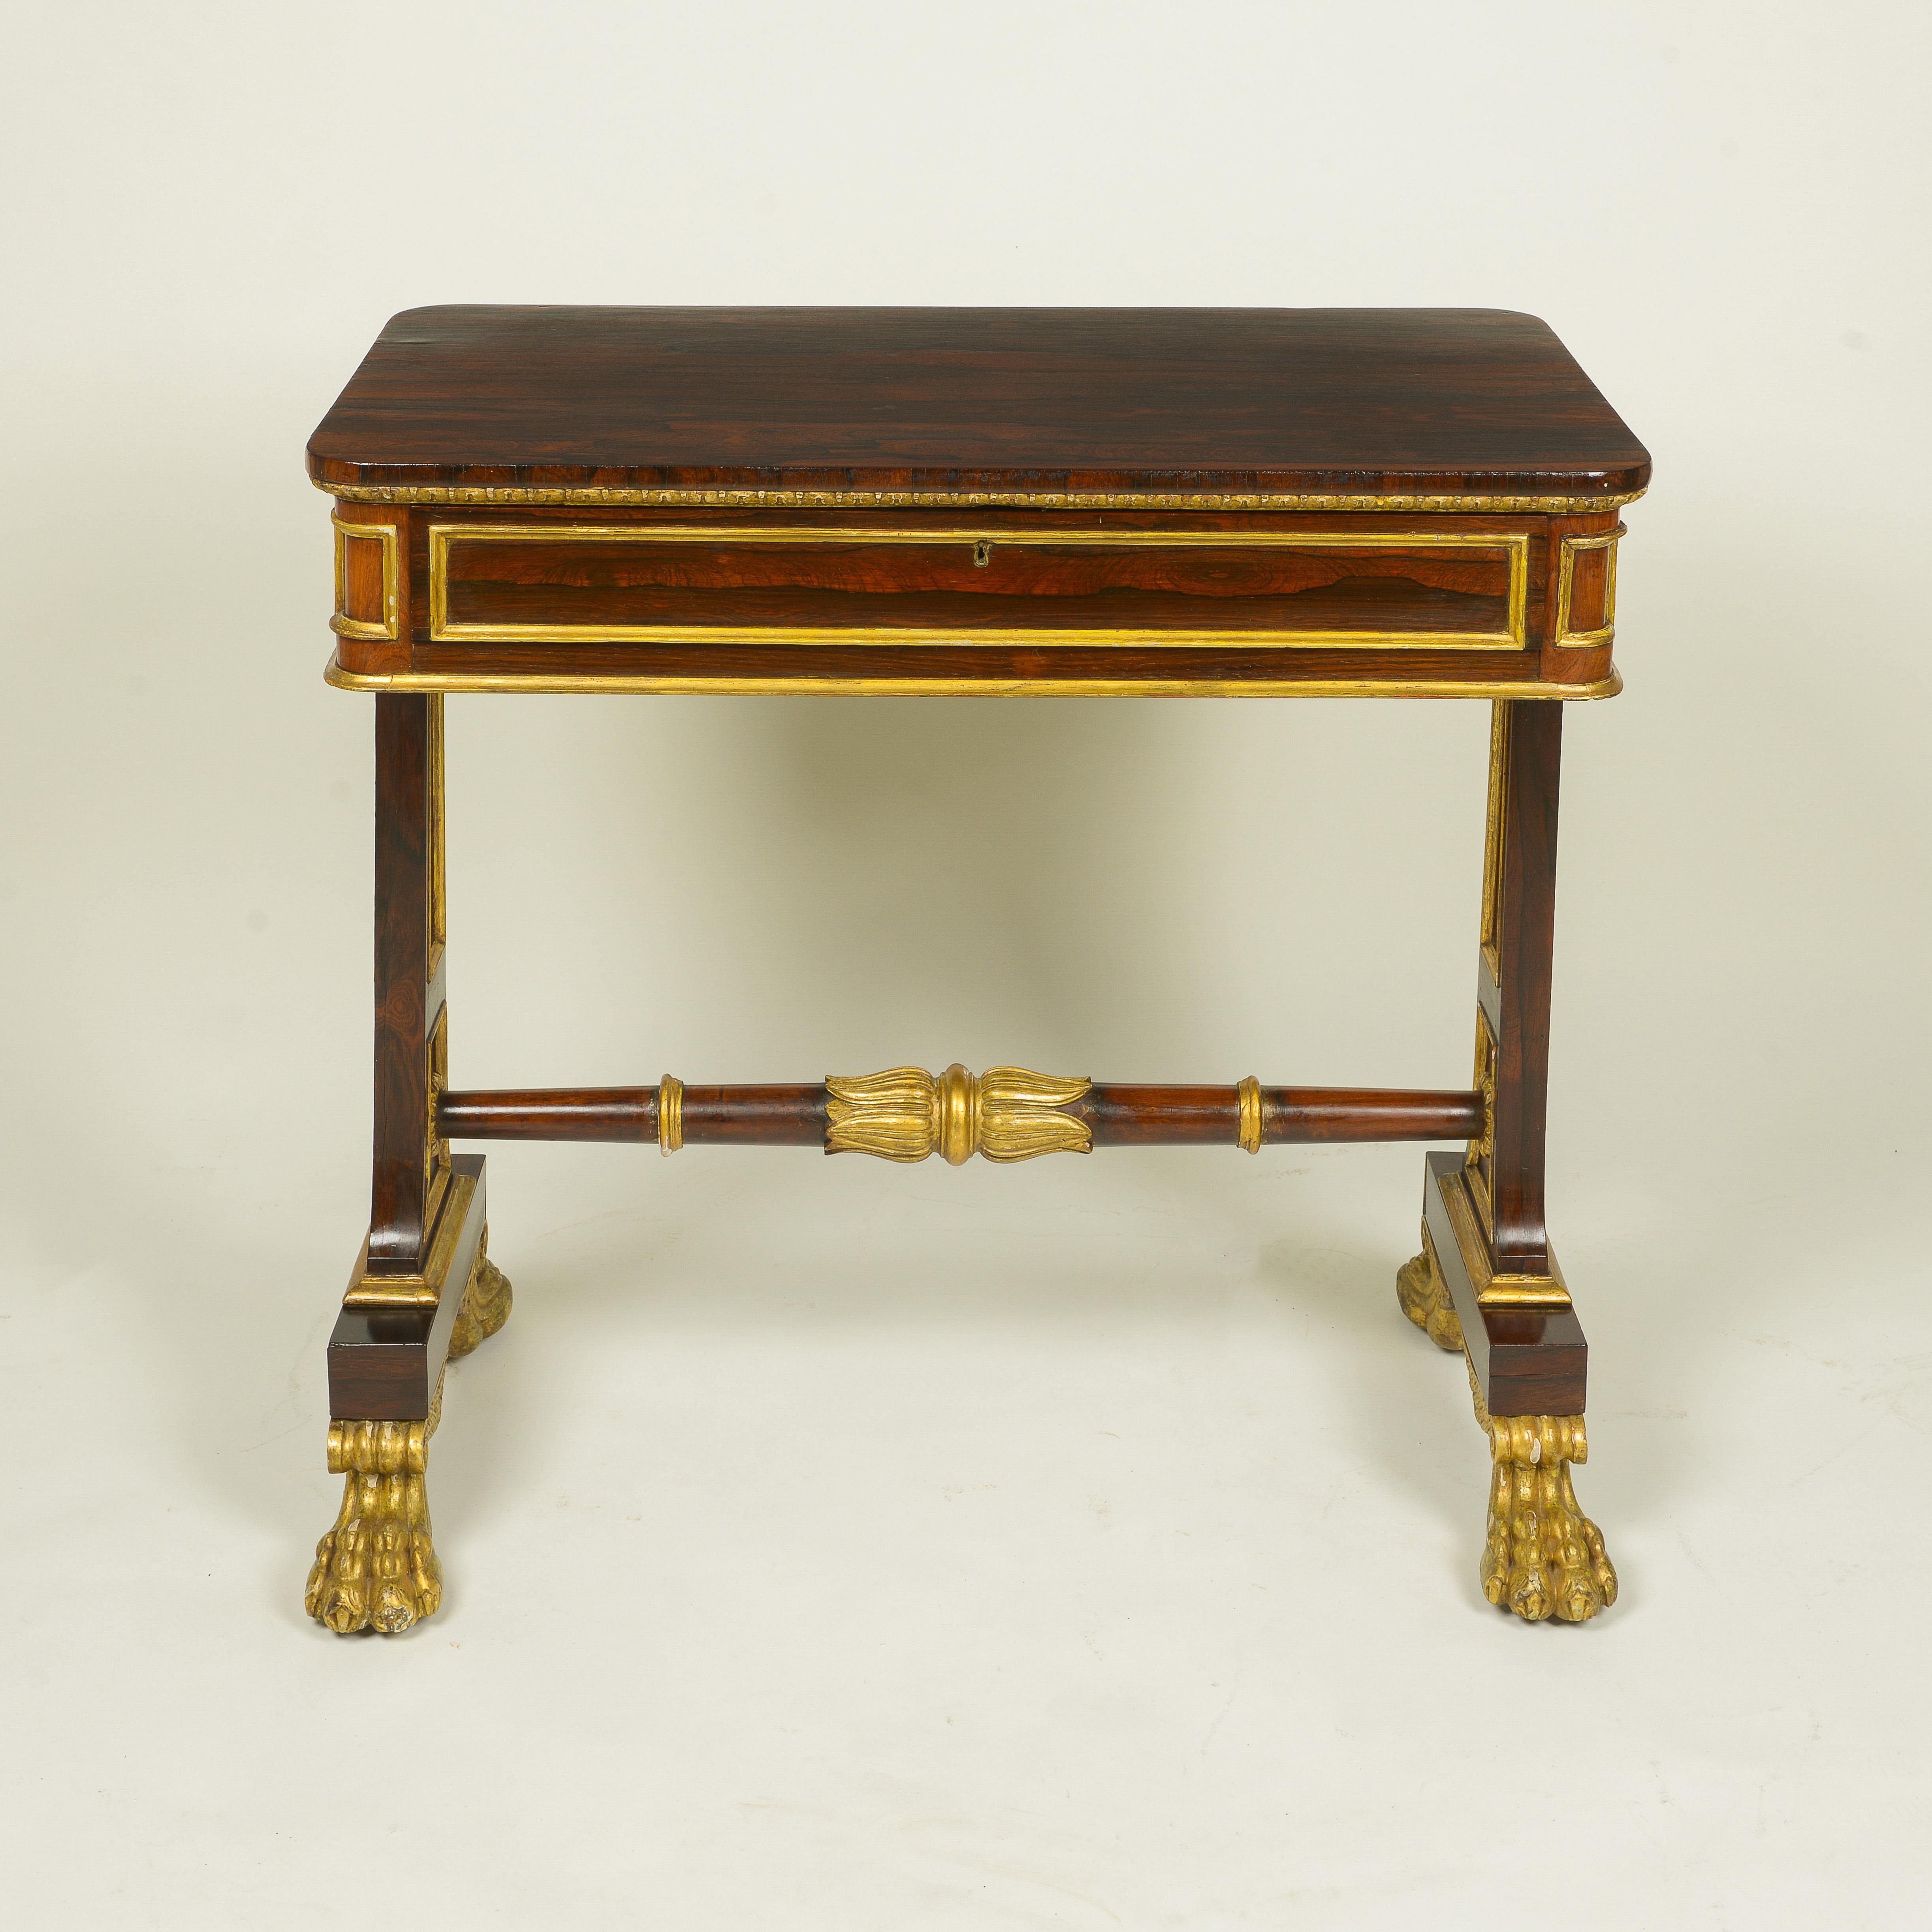 The rectangular top with rounded corners over an ormolu egg-and-dart mounted edge and paneled frieze fitted with one drawer; raised on standard end supports on giltwood winged paw feet and joined by a turned stretcher centered by a lotus leaf clasp.